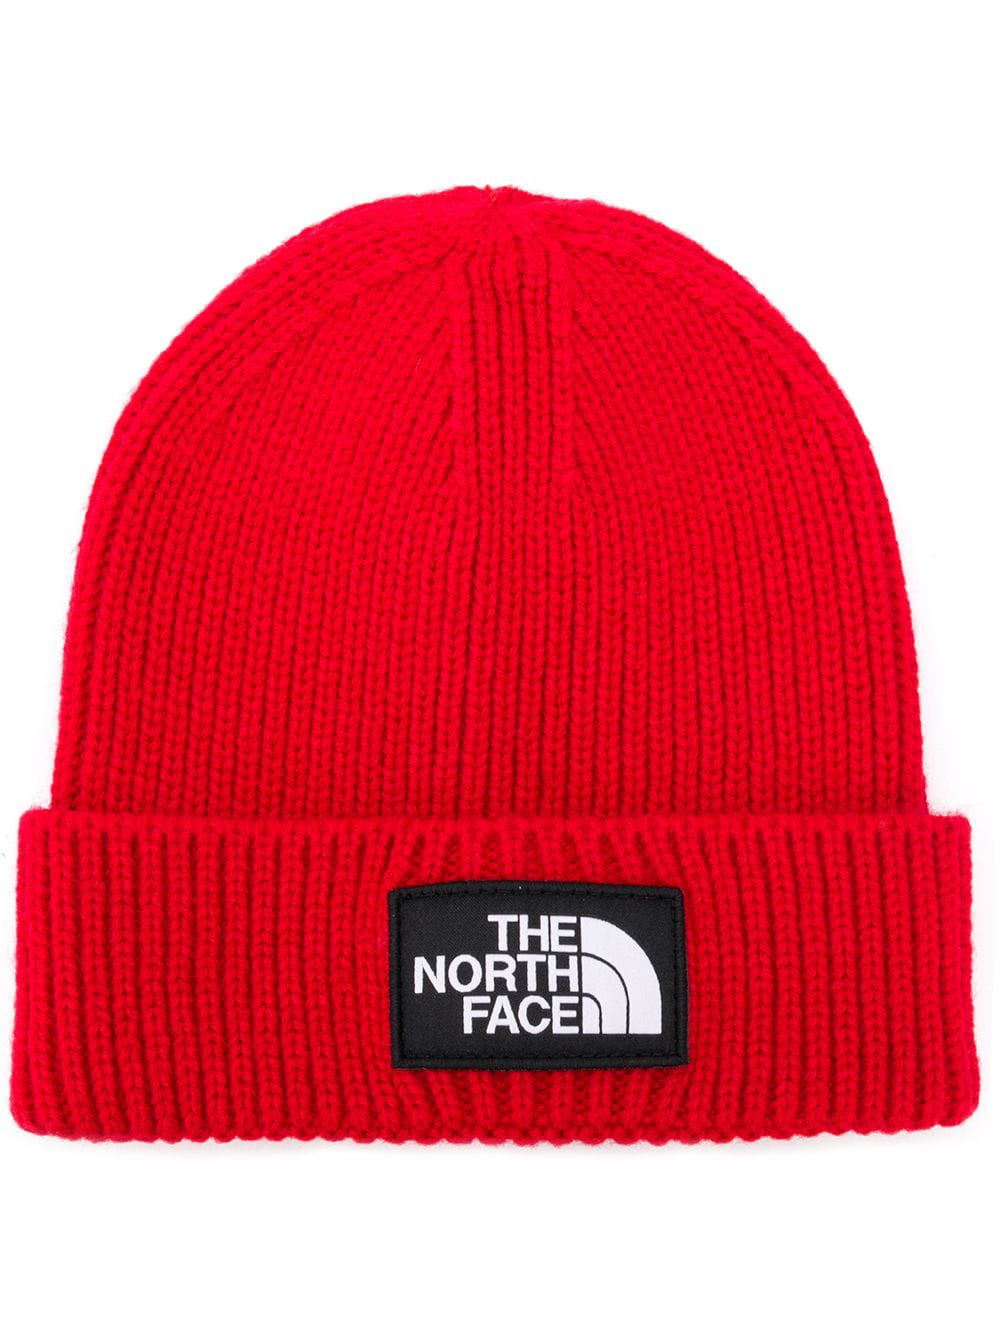 The North Face Logo Patch Beanie In Red | ModeSens